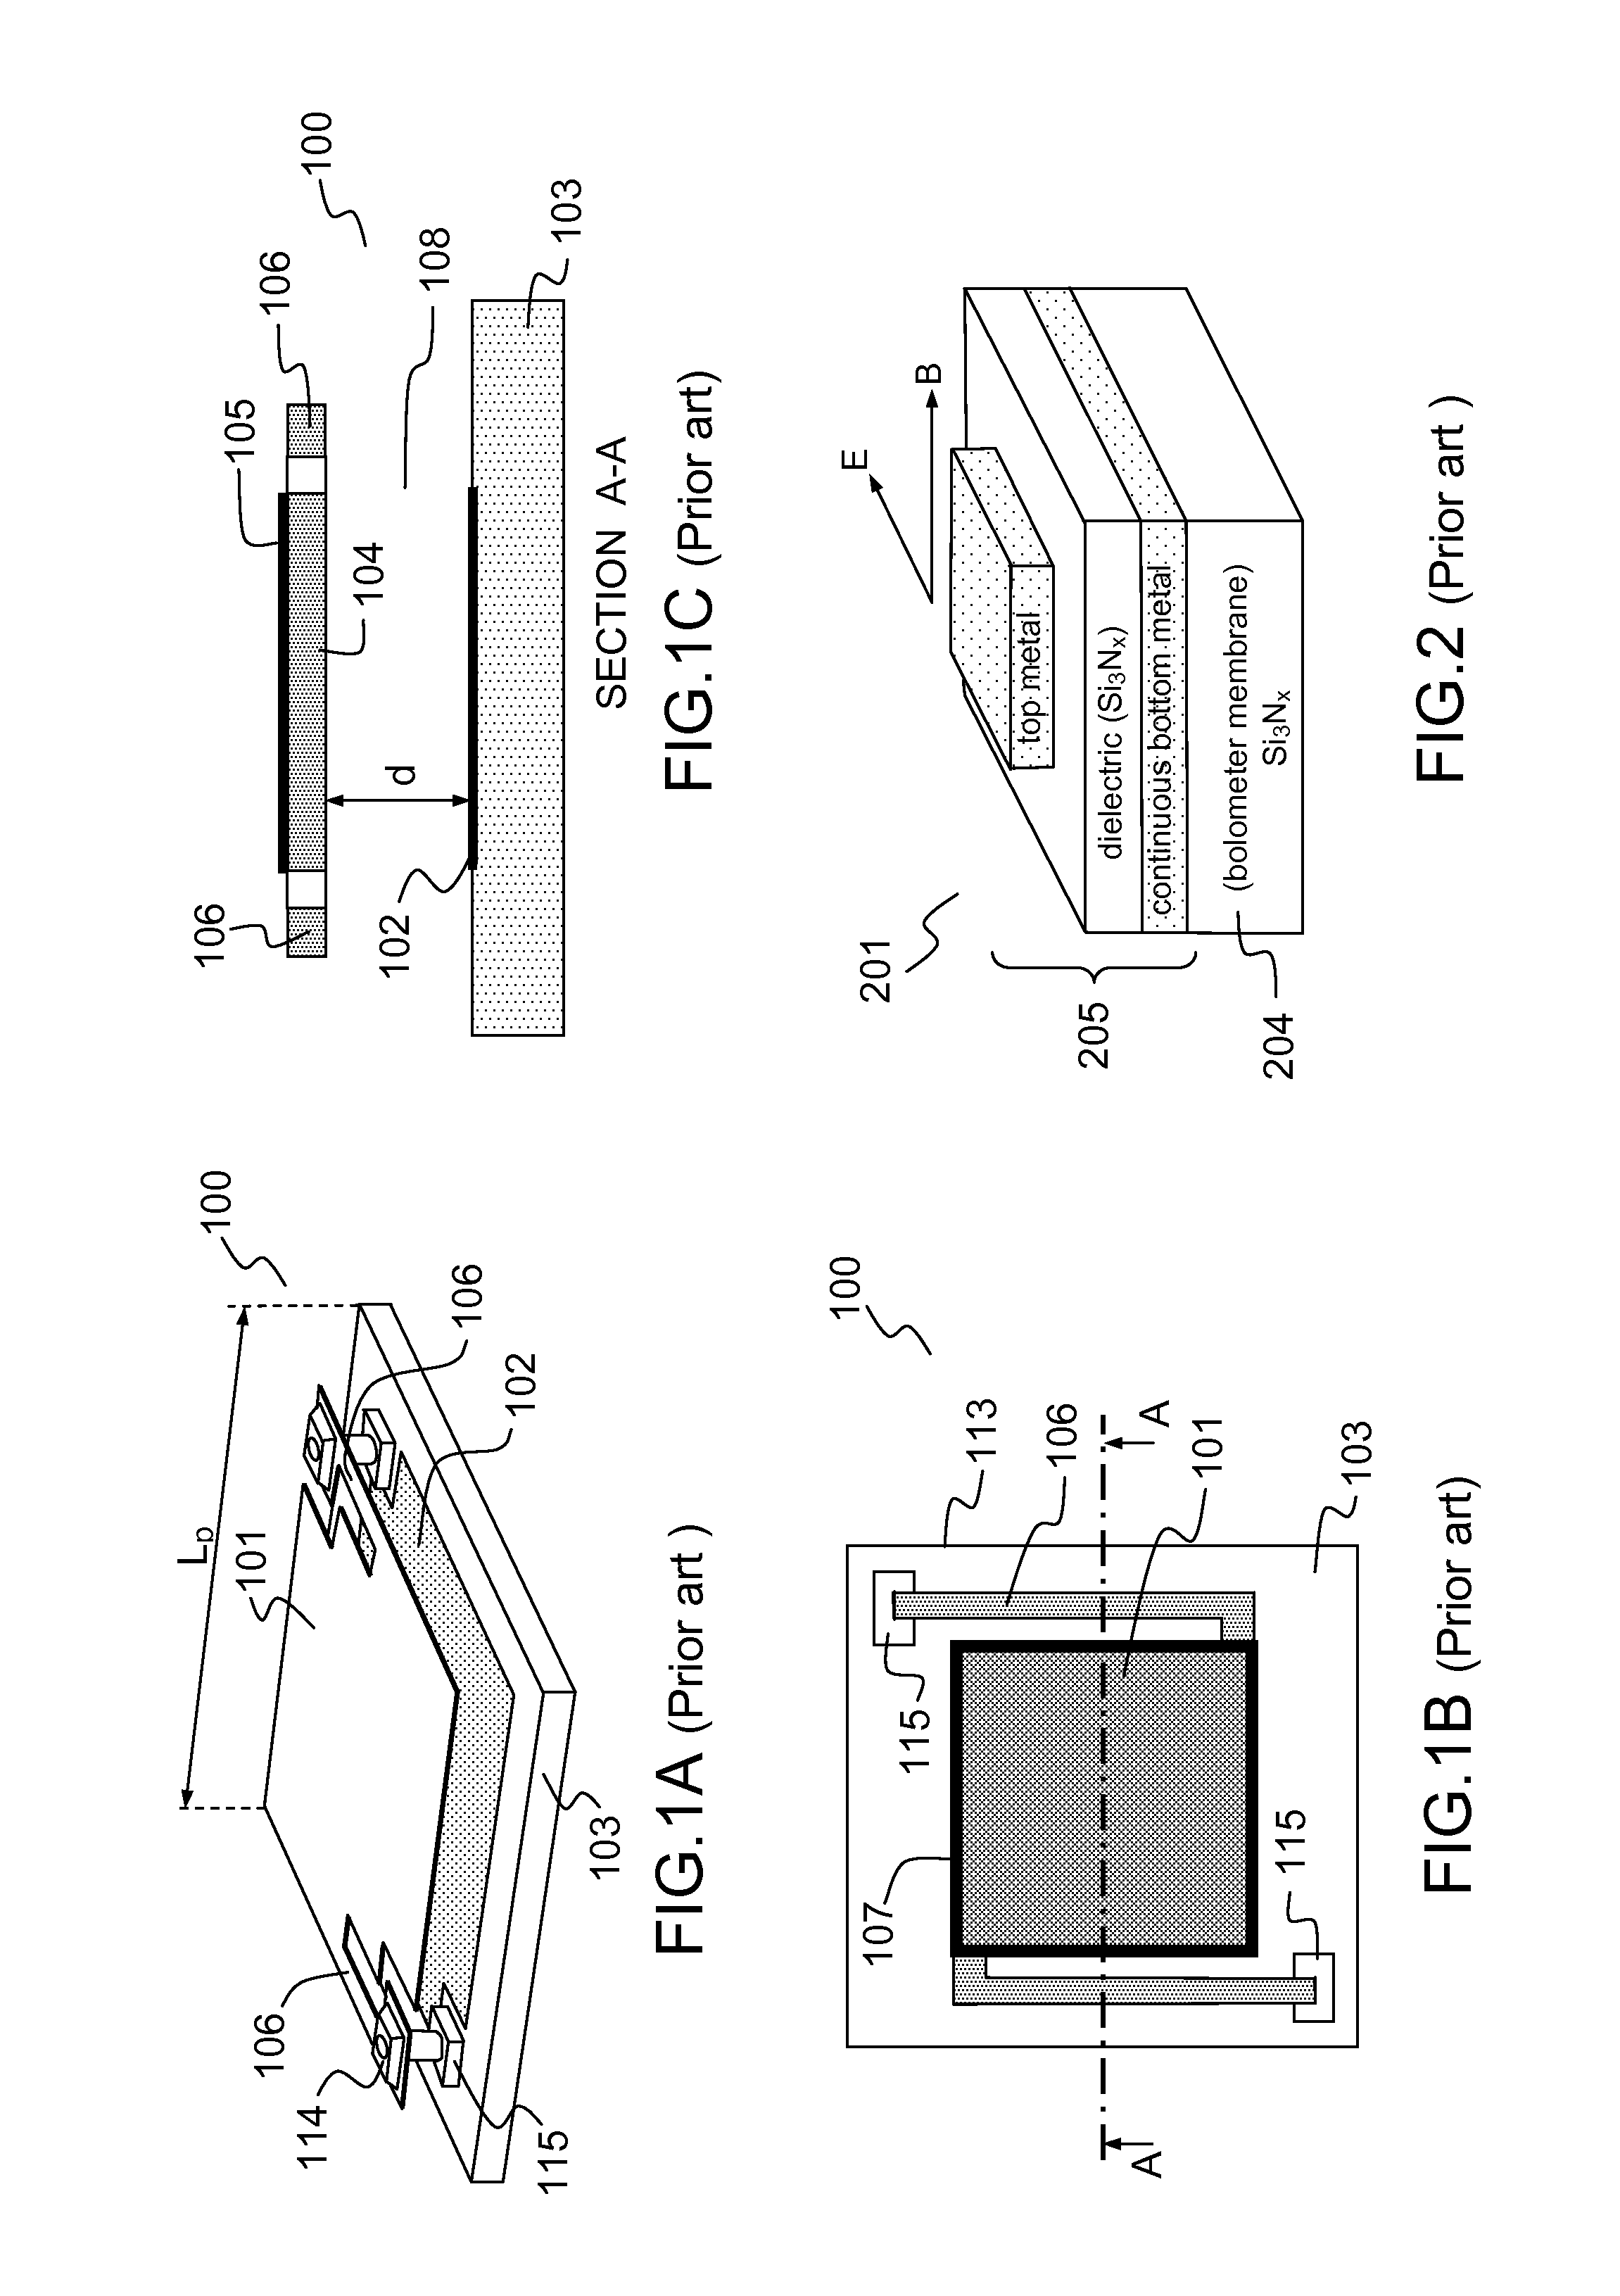 Microbolometer array with improved performance